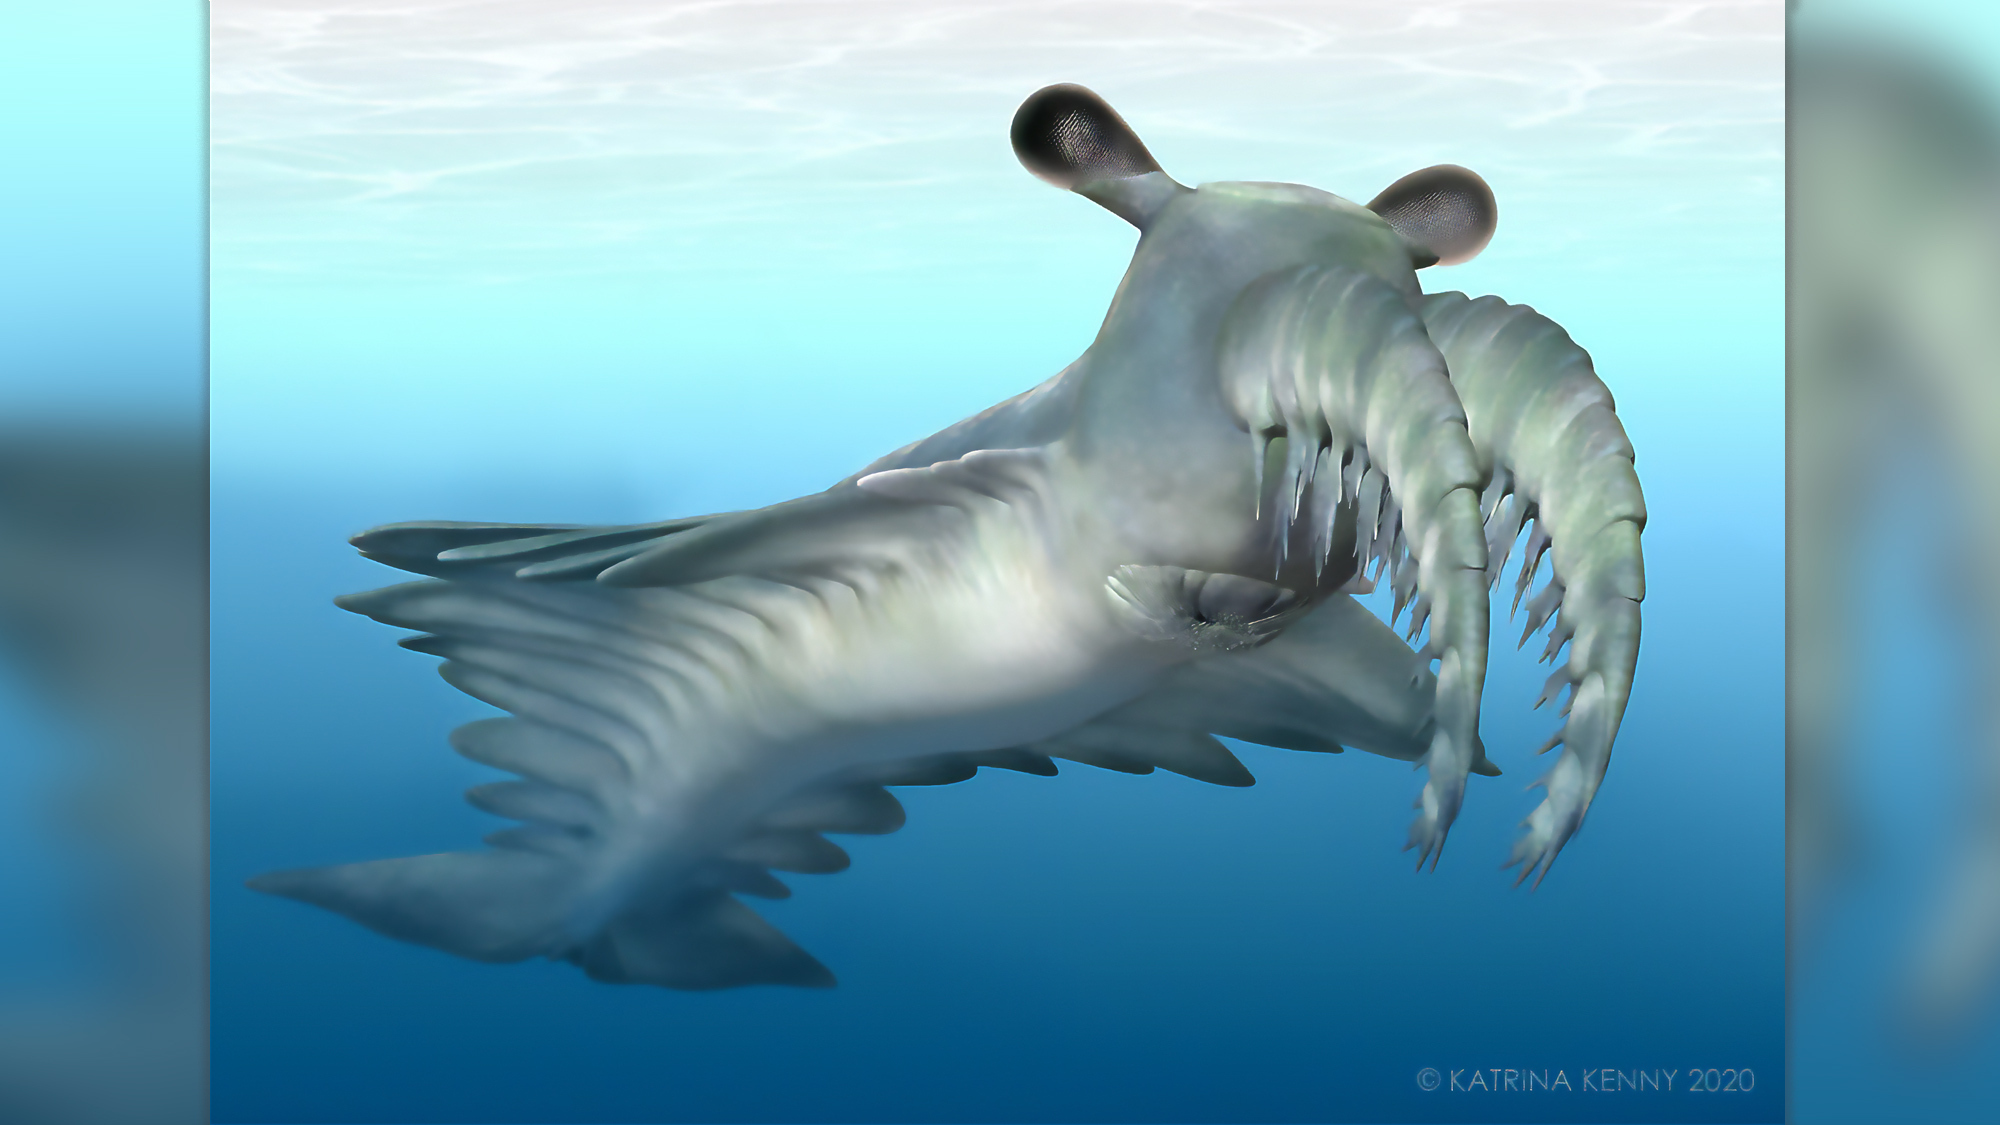 An illustration of Anomalocaris, which lived 541 million to 530 million years ago during the Cambrian Period. The animal has two bulging eyes on the top of its head and spiny front appendages,